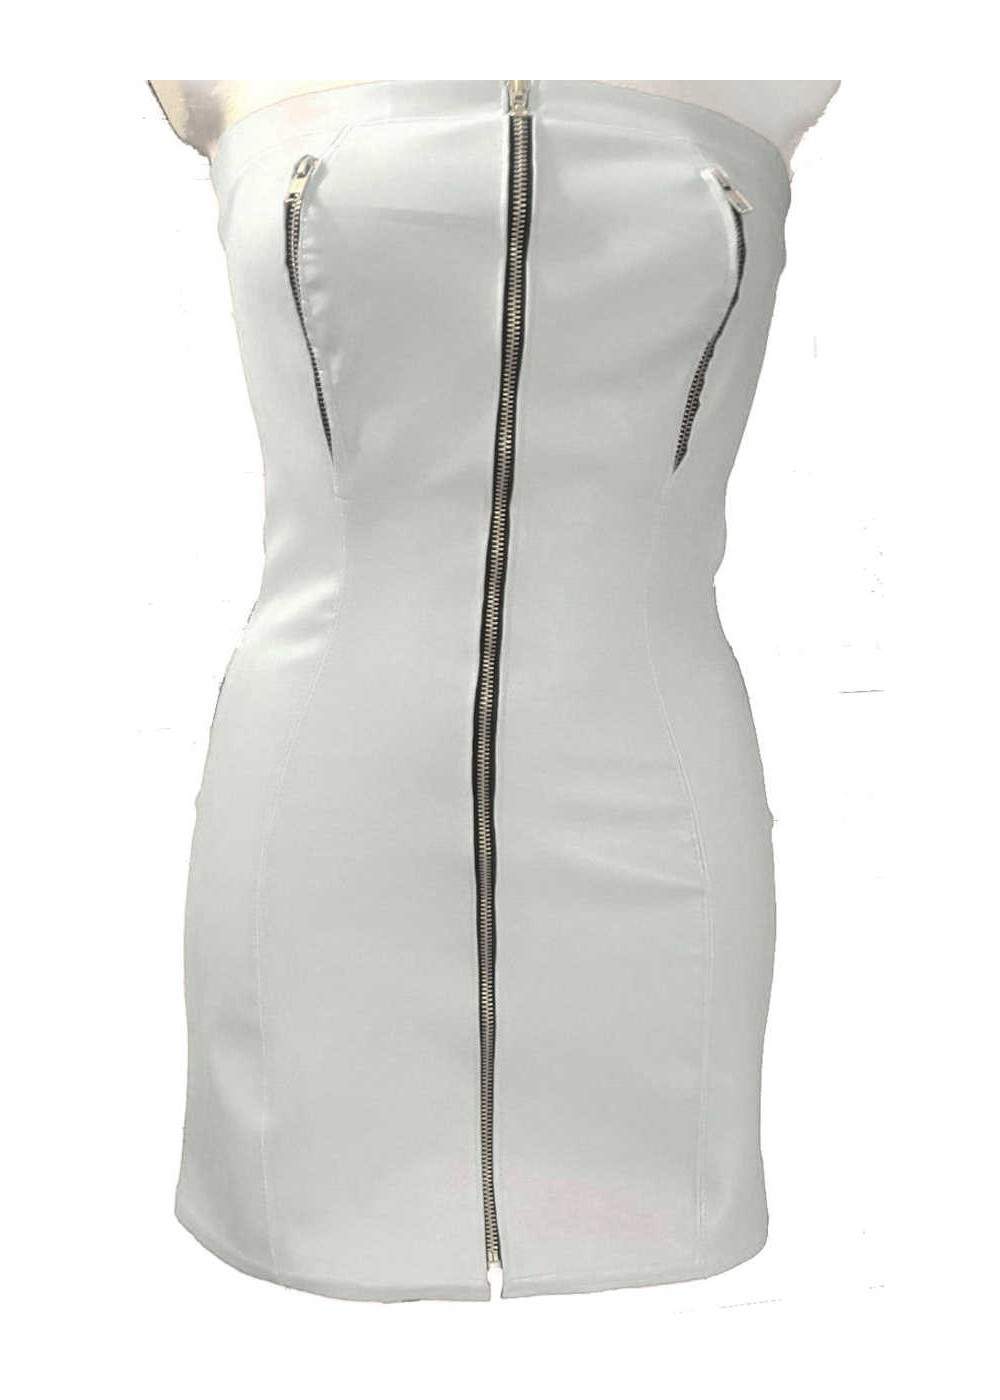 black week Save 15% White leather dress on breasts to open with zipper - 